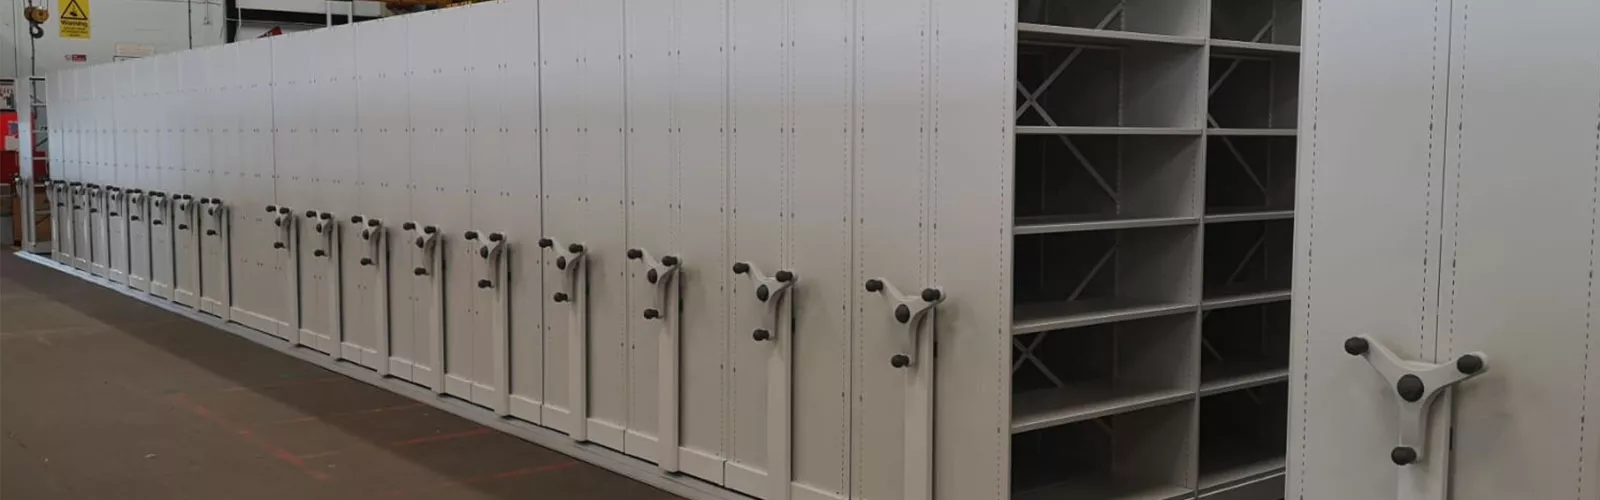 Roller Racking & Storage Solutions